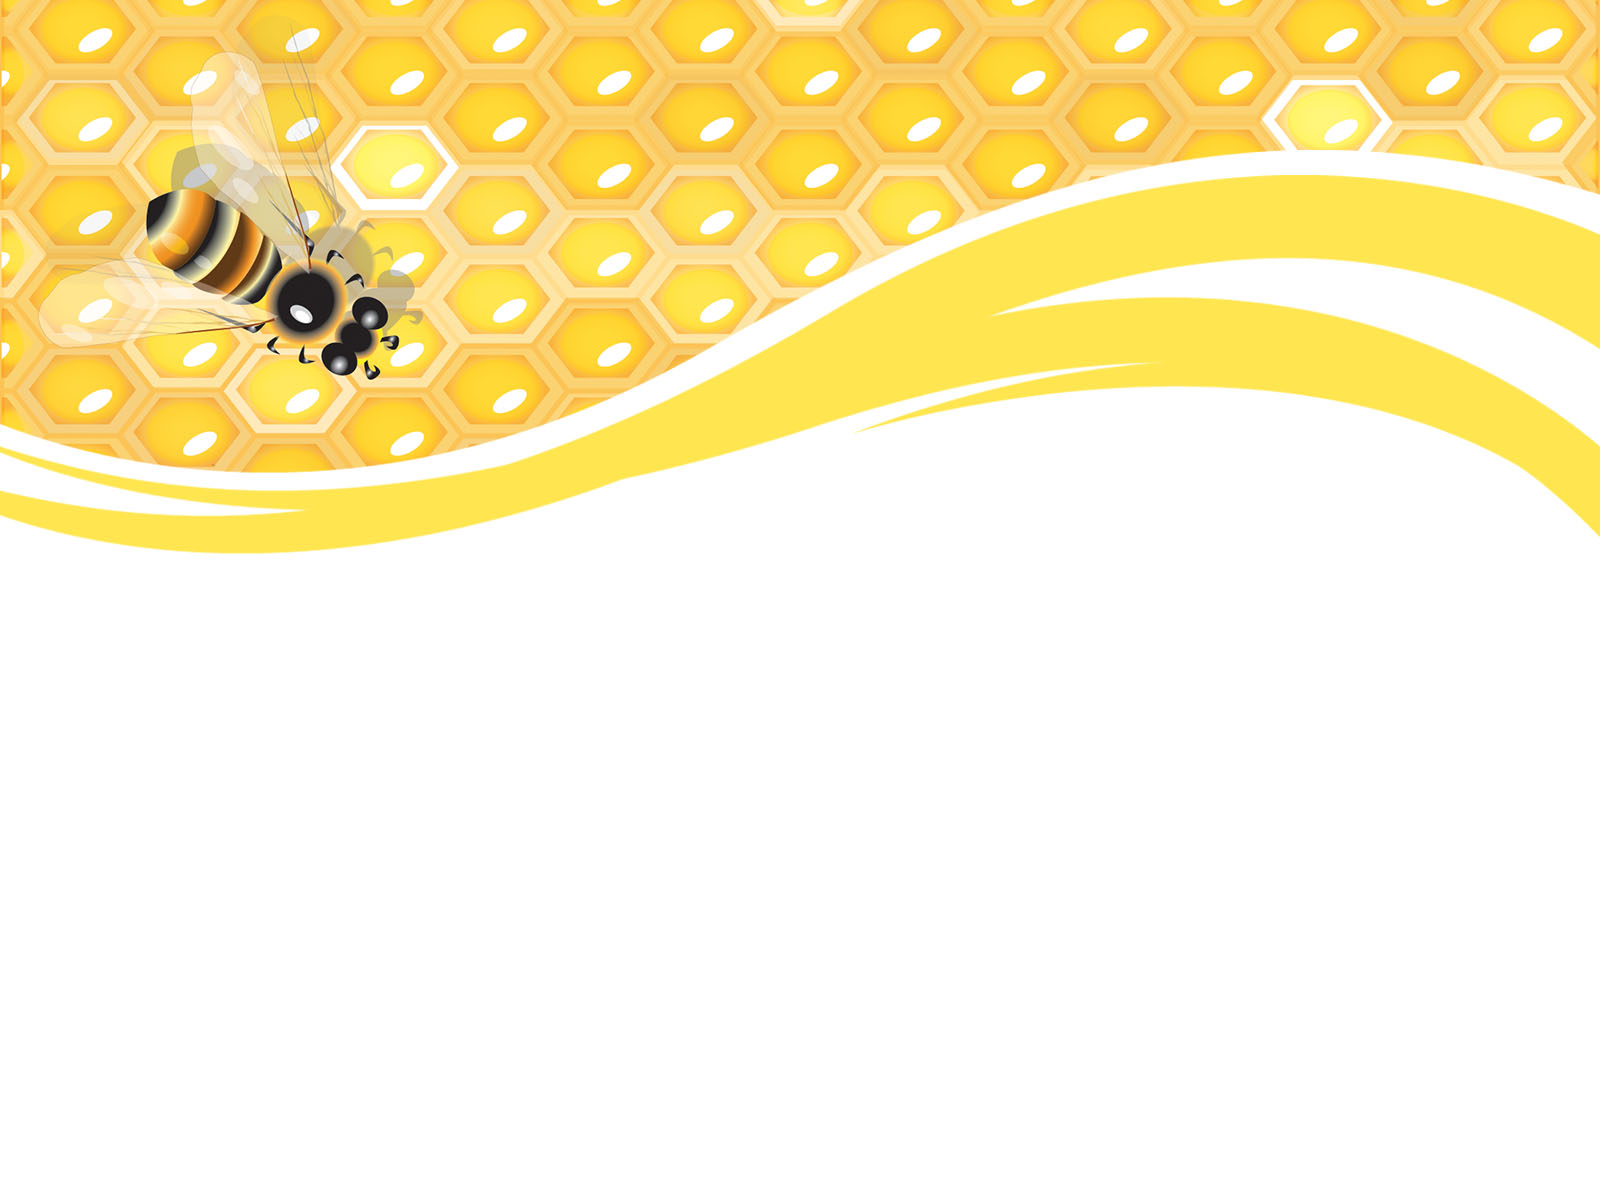 Bee Powerpoint Template